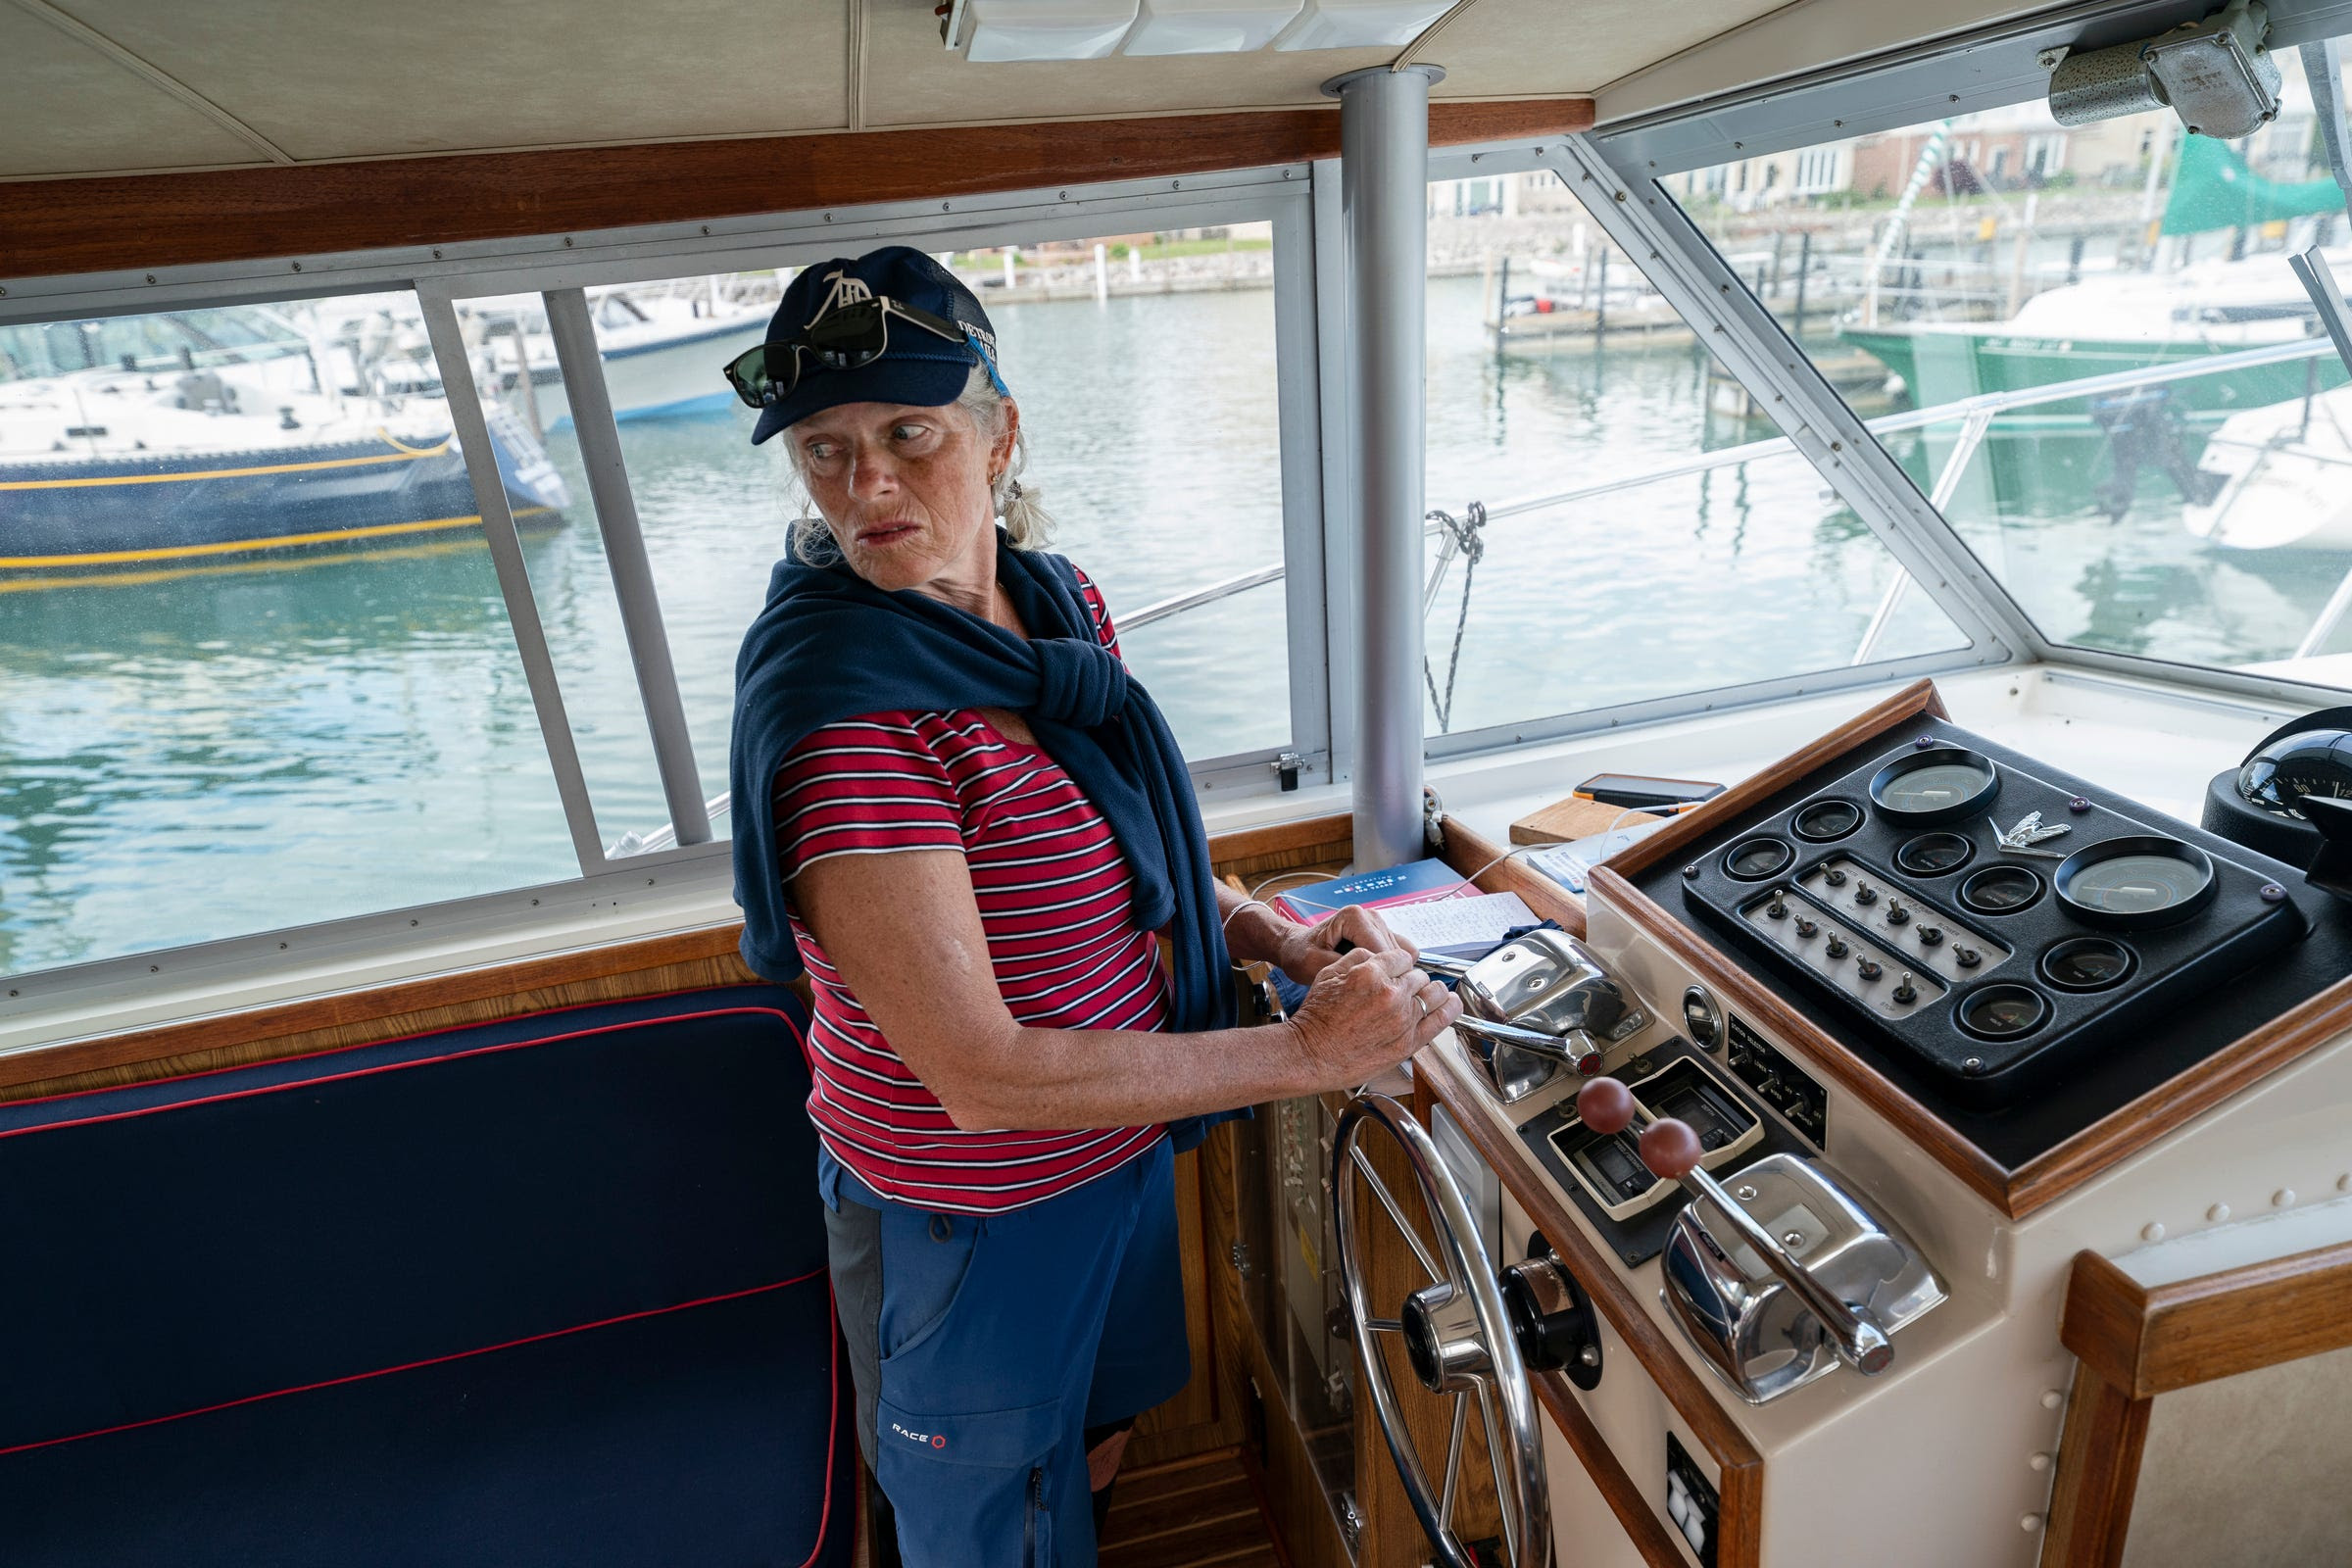 Captain Ann Perrault uses controls to steer the Bertram 33 power boat out of the Grayhaven State Harbor marina on Saturday, June 4, 2022. Perrault and first mate Julion De'Angelo took out a group on a charter tour of the Detroit River.